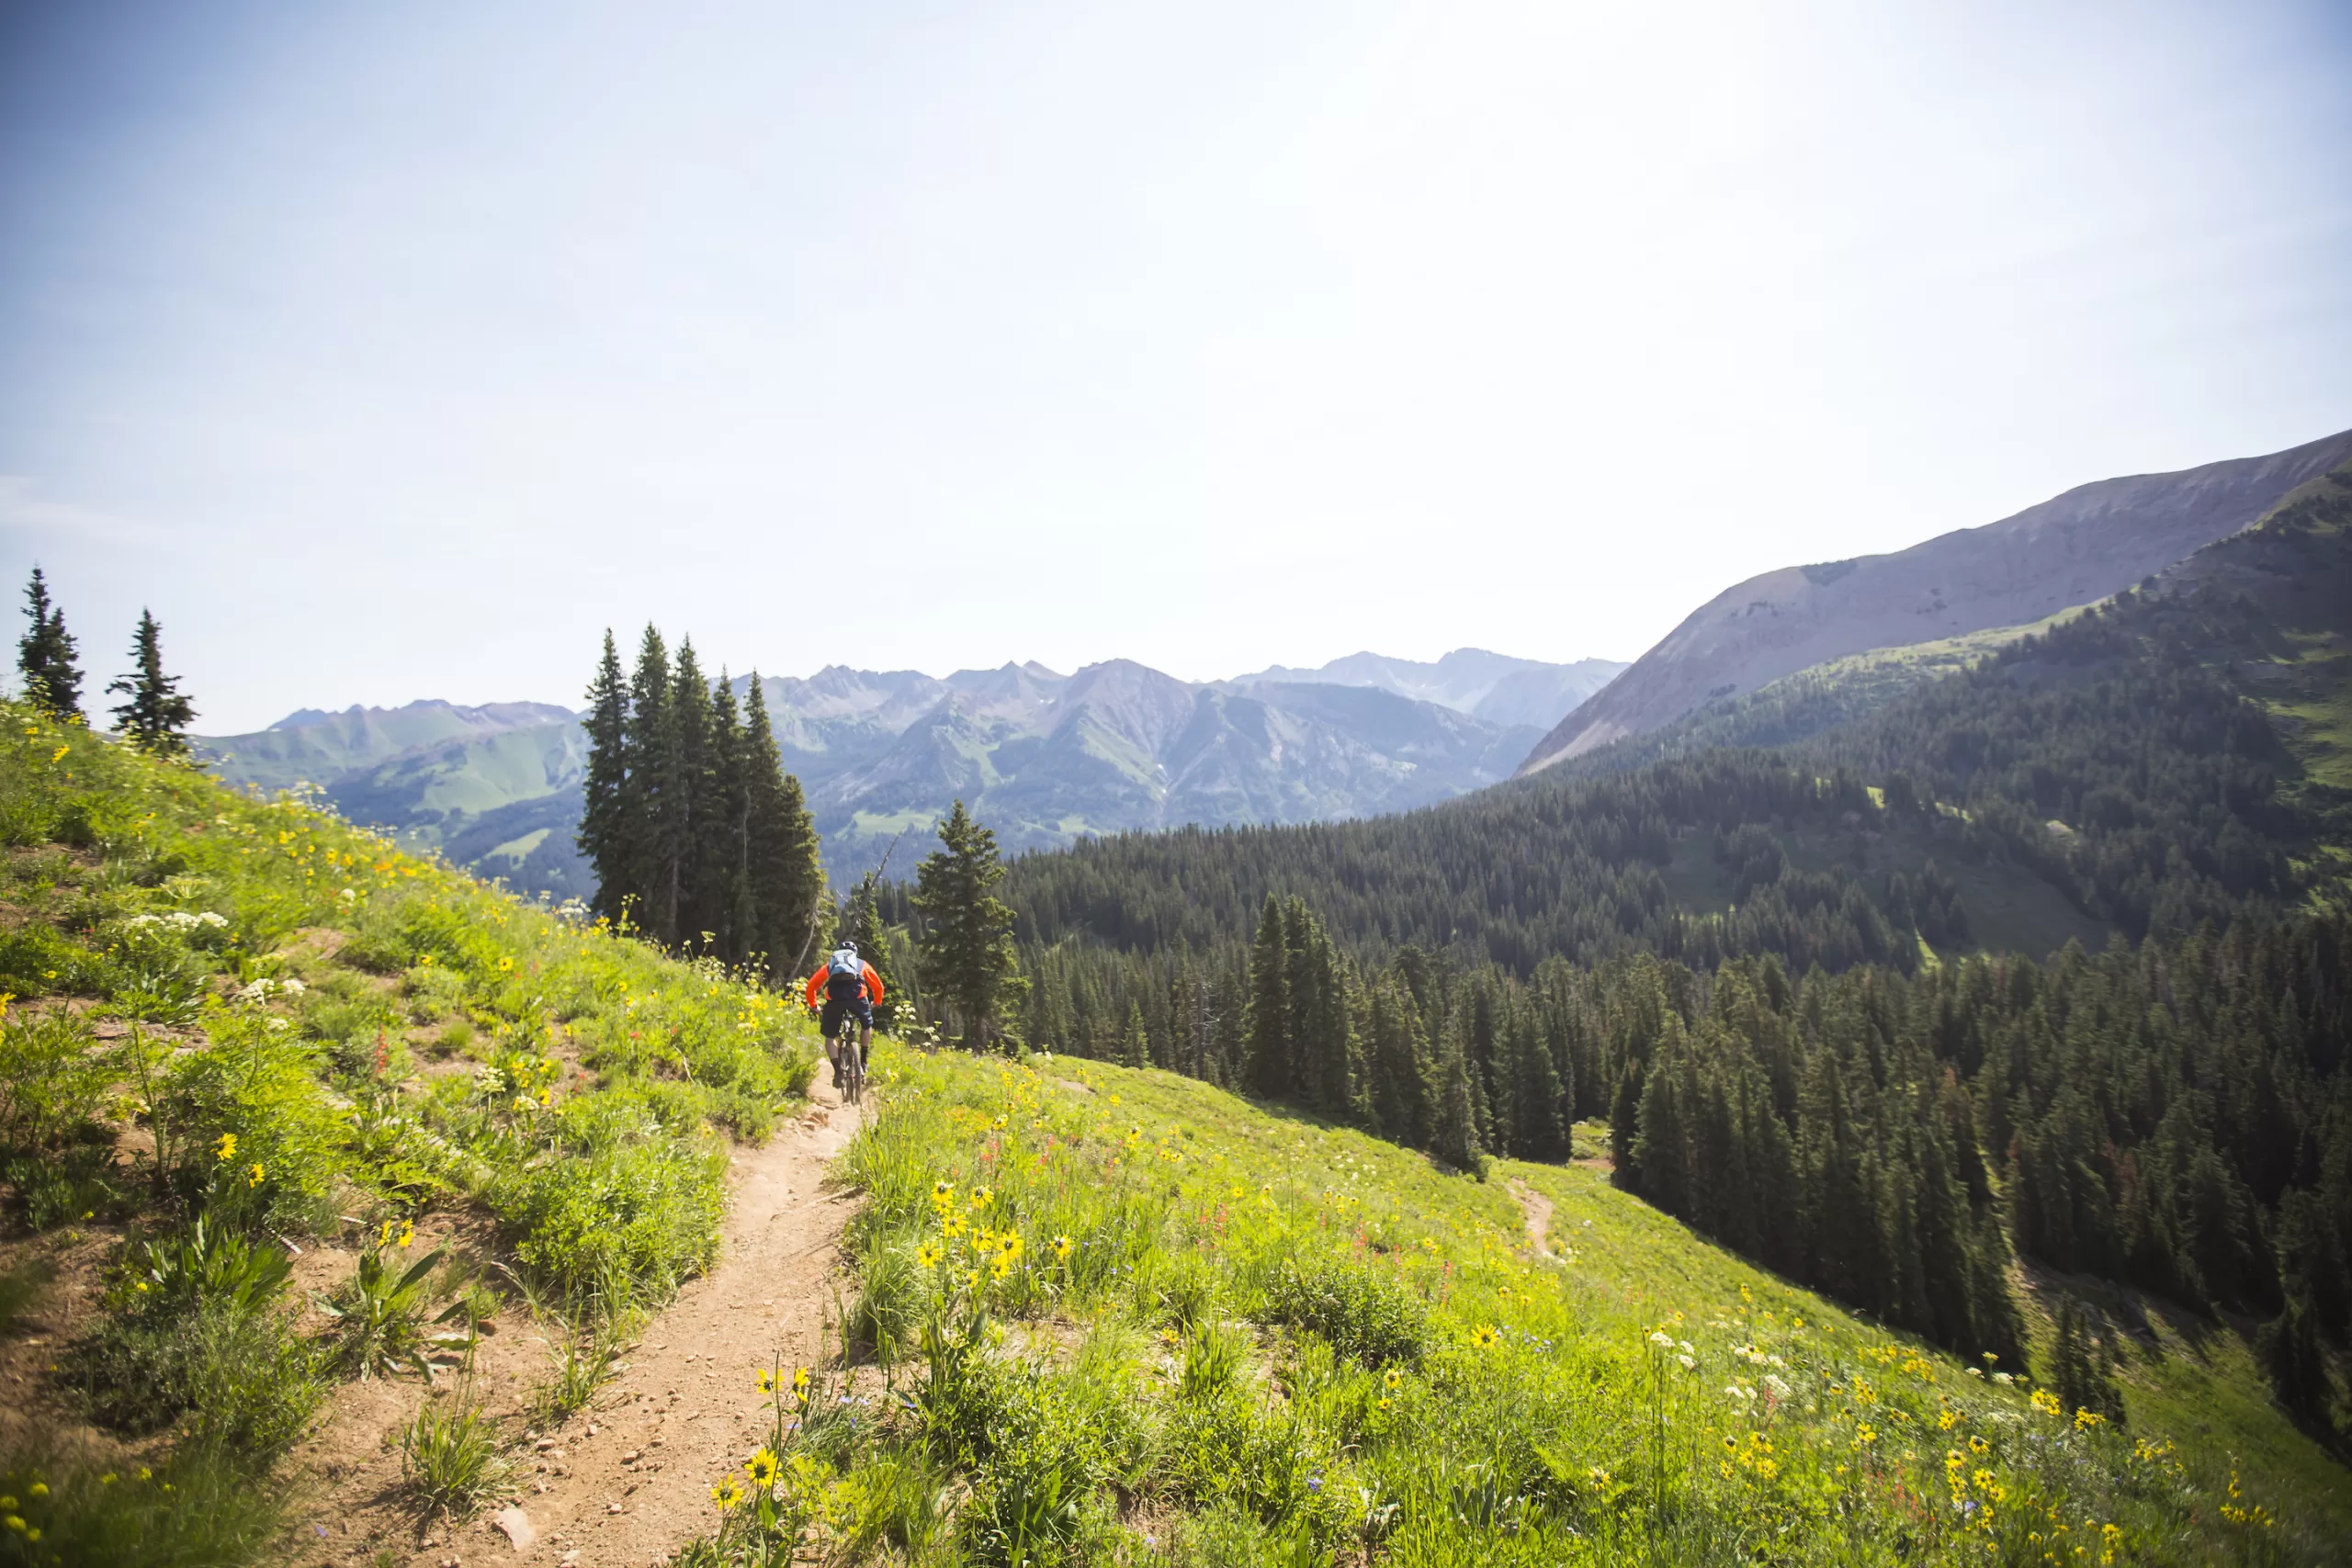 A vista of mountain peaks, trees and meadows with a biker on a trail